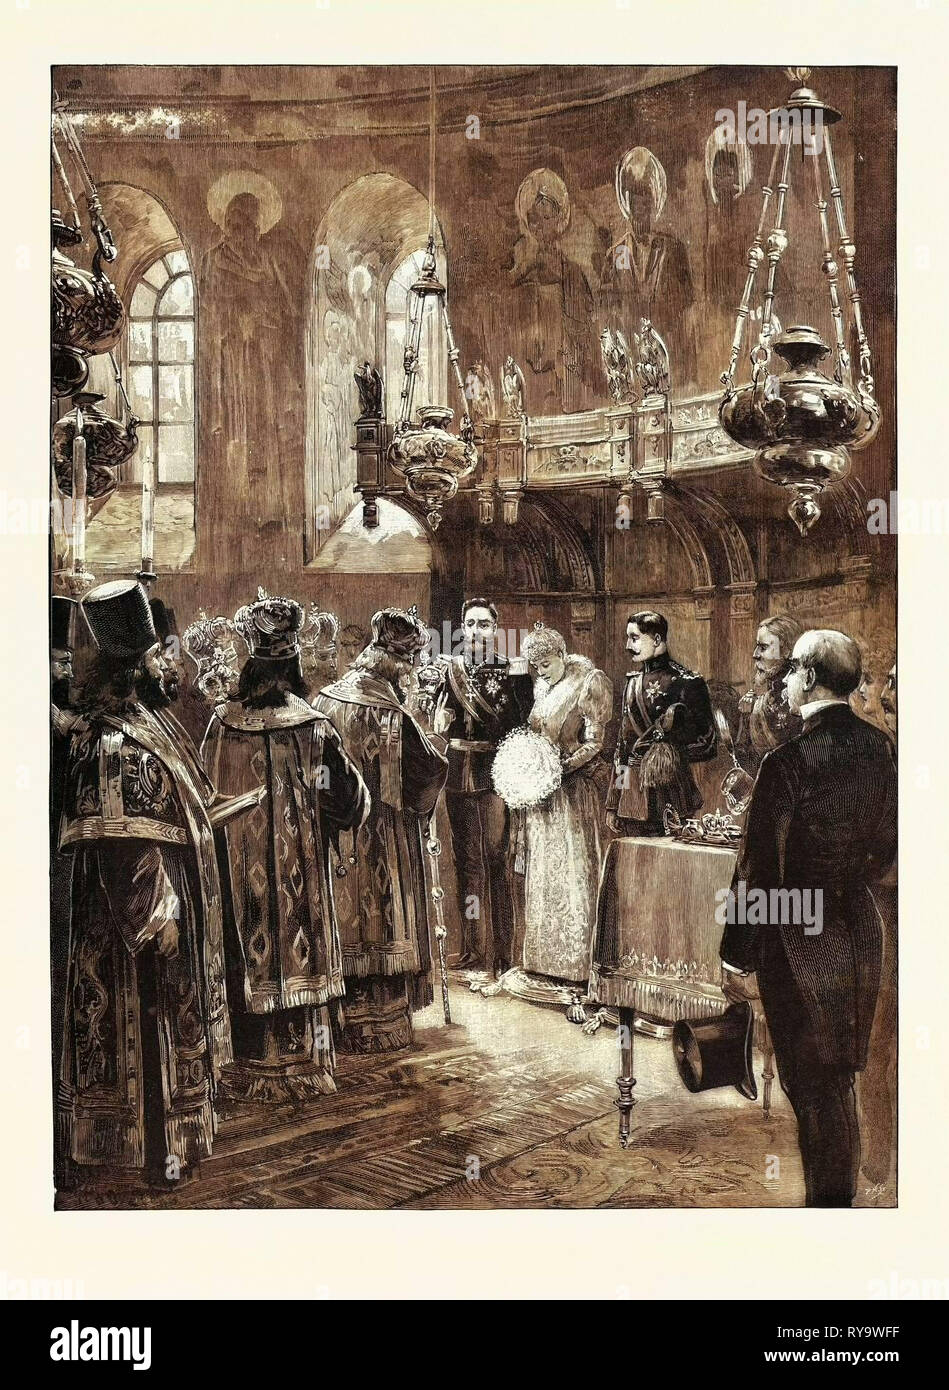 The Royal Home-Coming at Bucharest: Ceremony in the Metropolitan Church, Romania, 1893 Engraving Stock Photo